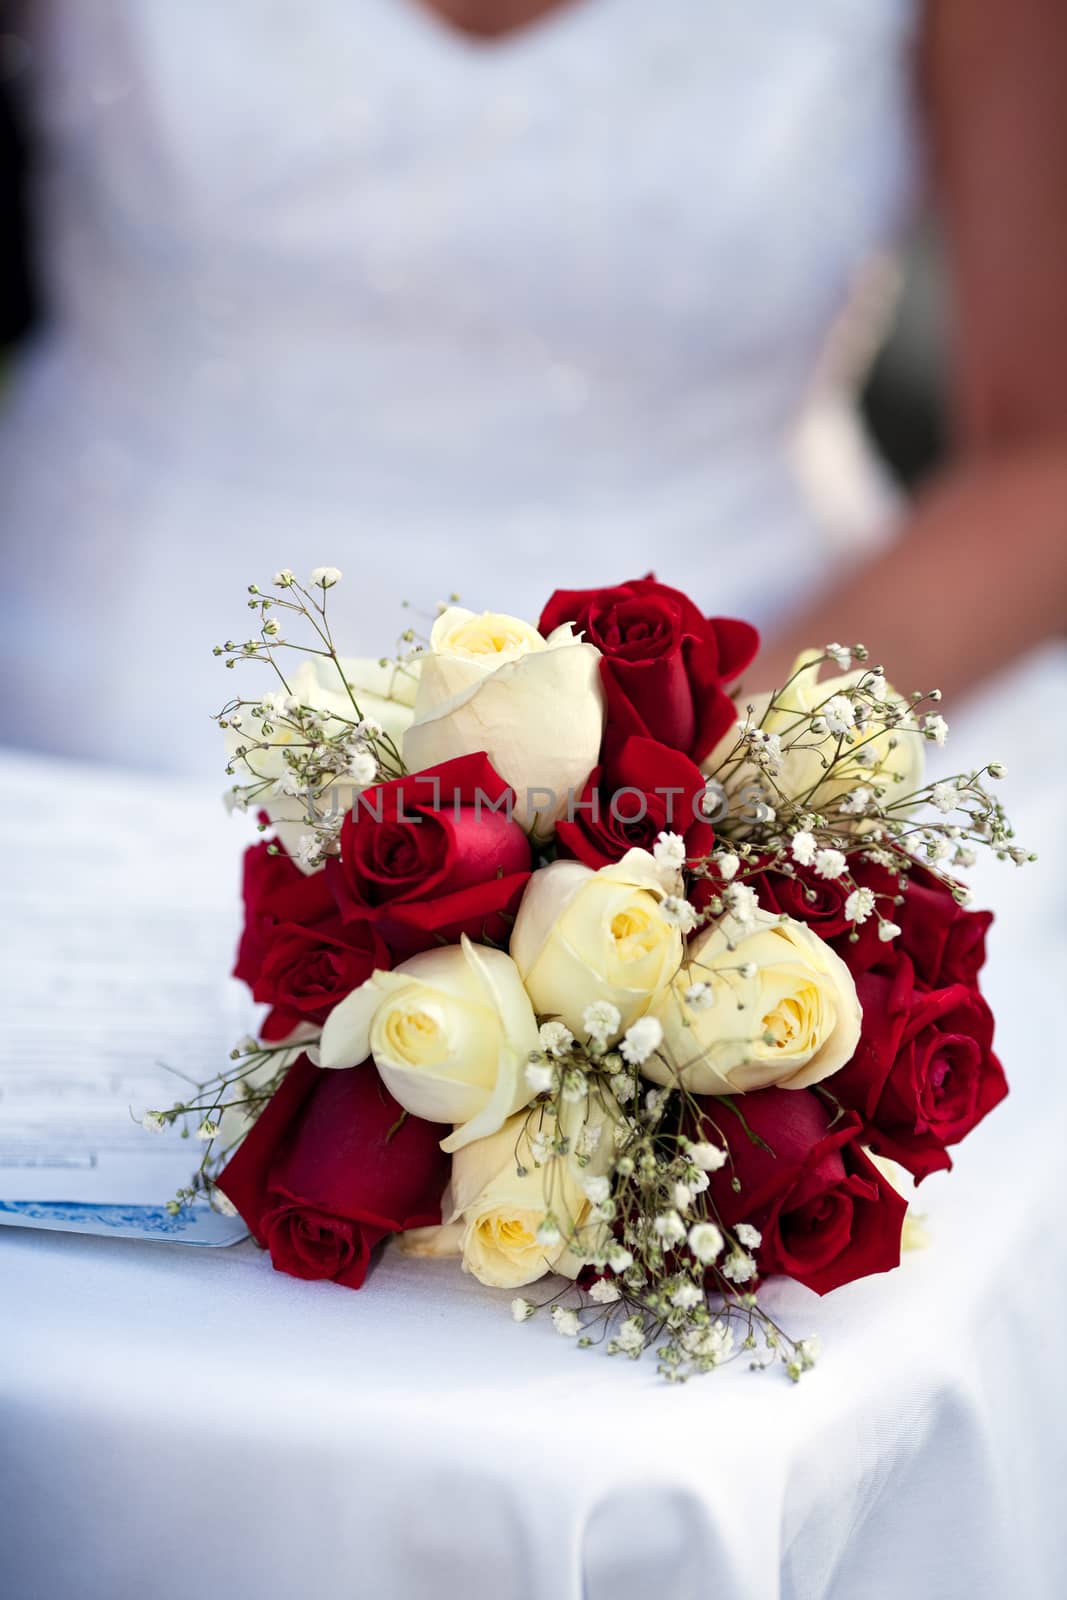 A wedding bouquet of red and white roses with wisps of babybreath, stands in the forefront while a bride signs in the muted background.